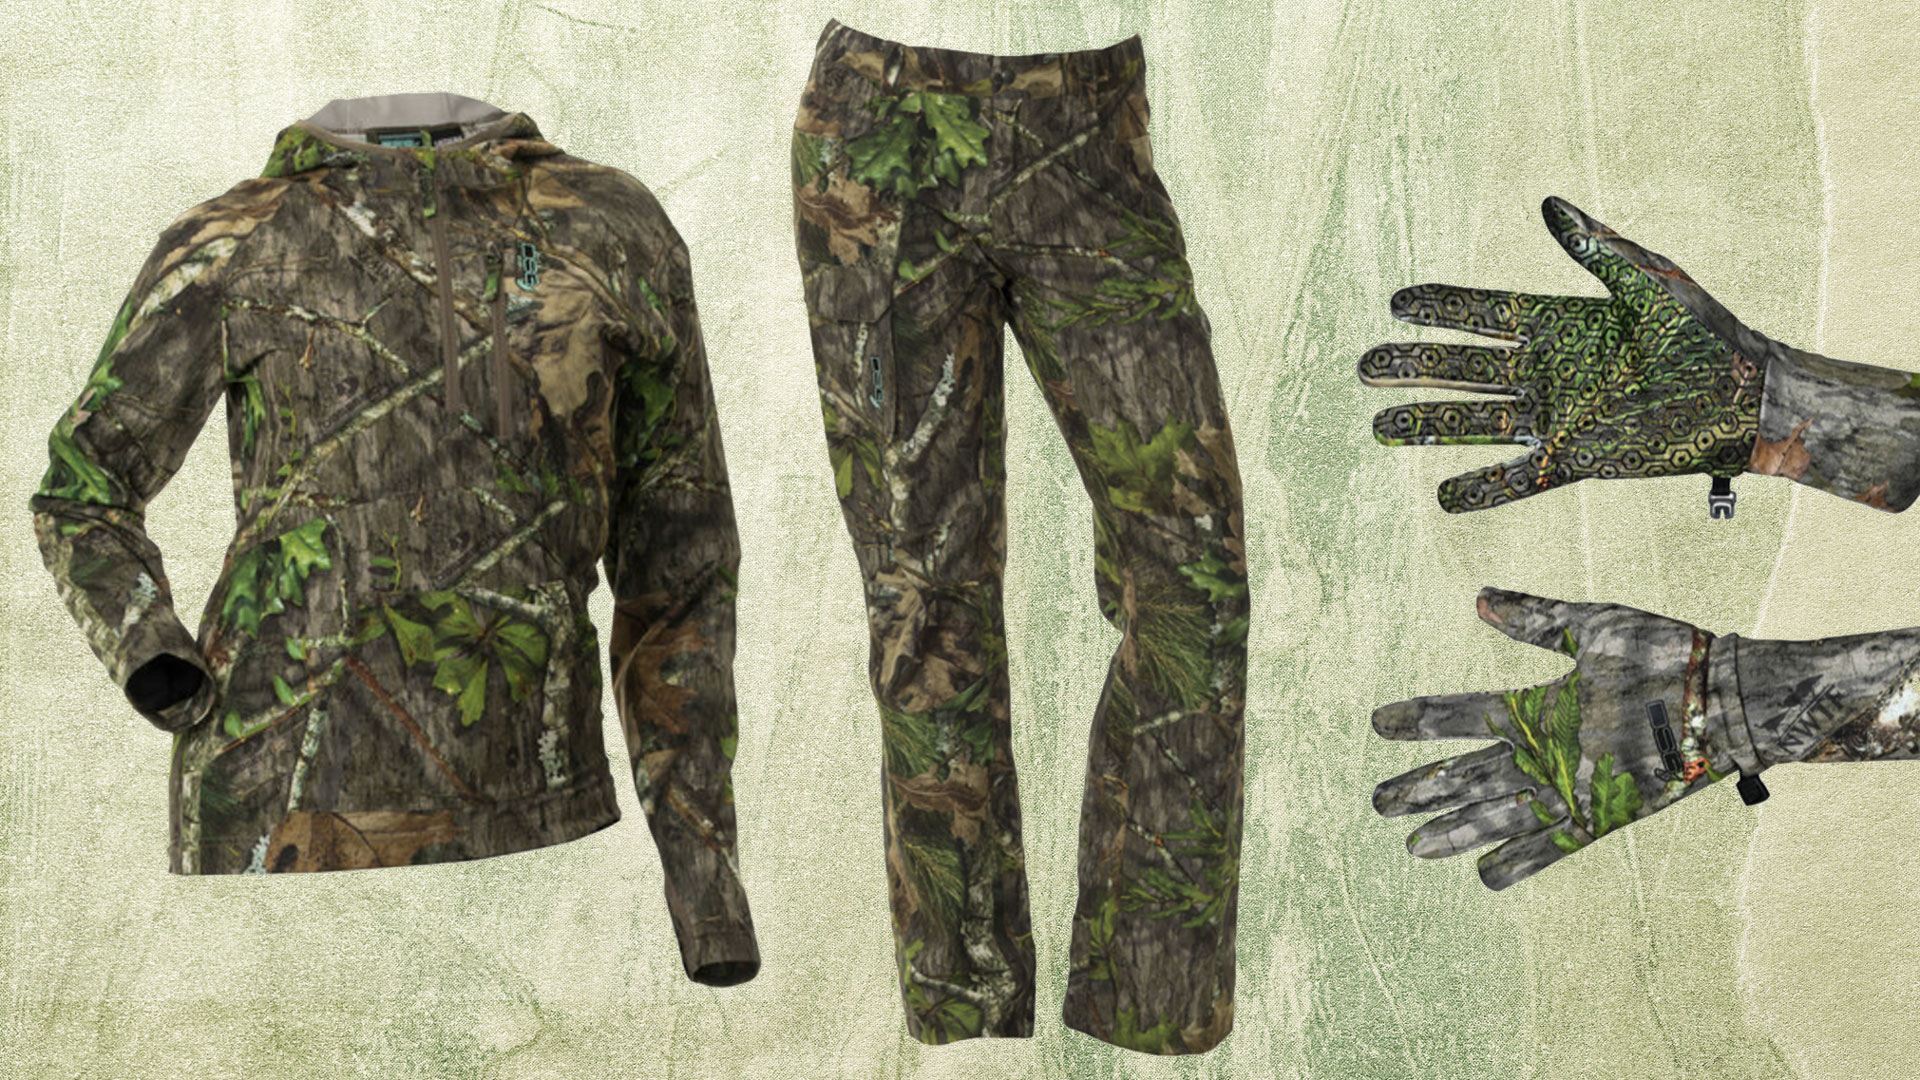 Bexley 2.0 Ripstop Hunting Pant in Mossy Oak Obsession - Large | DSG Outerwear